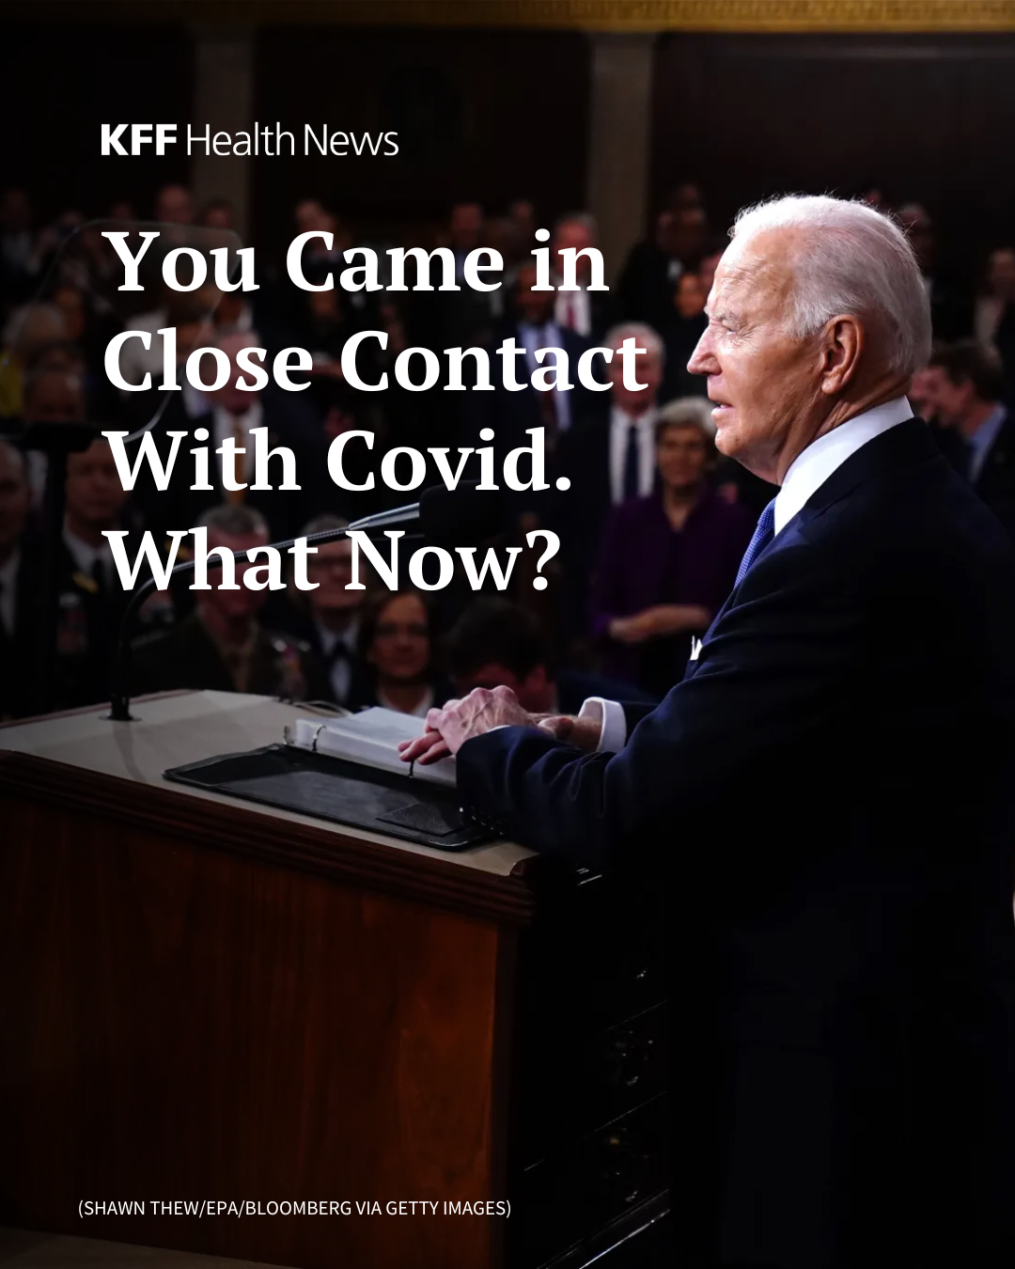 A slide with a photo of president Biden reads: You Came in Close Contact With Covid. What Now?